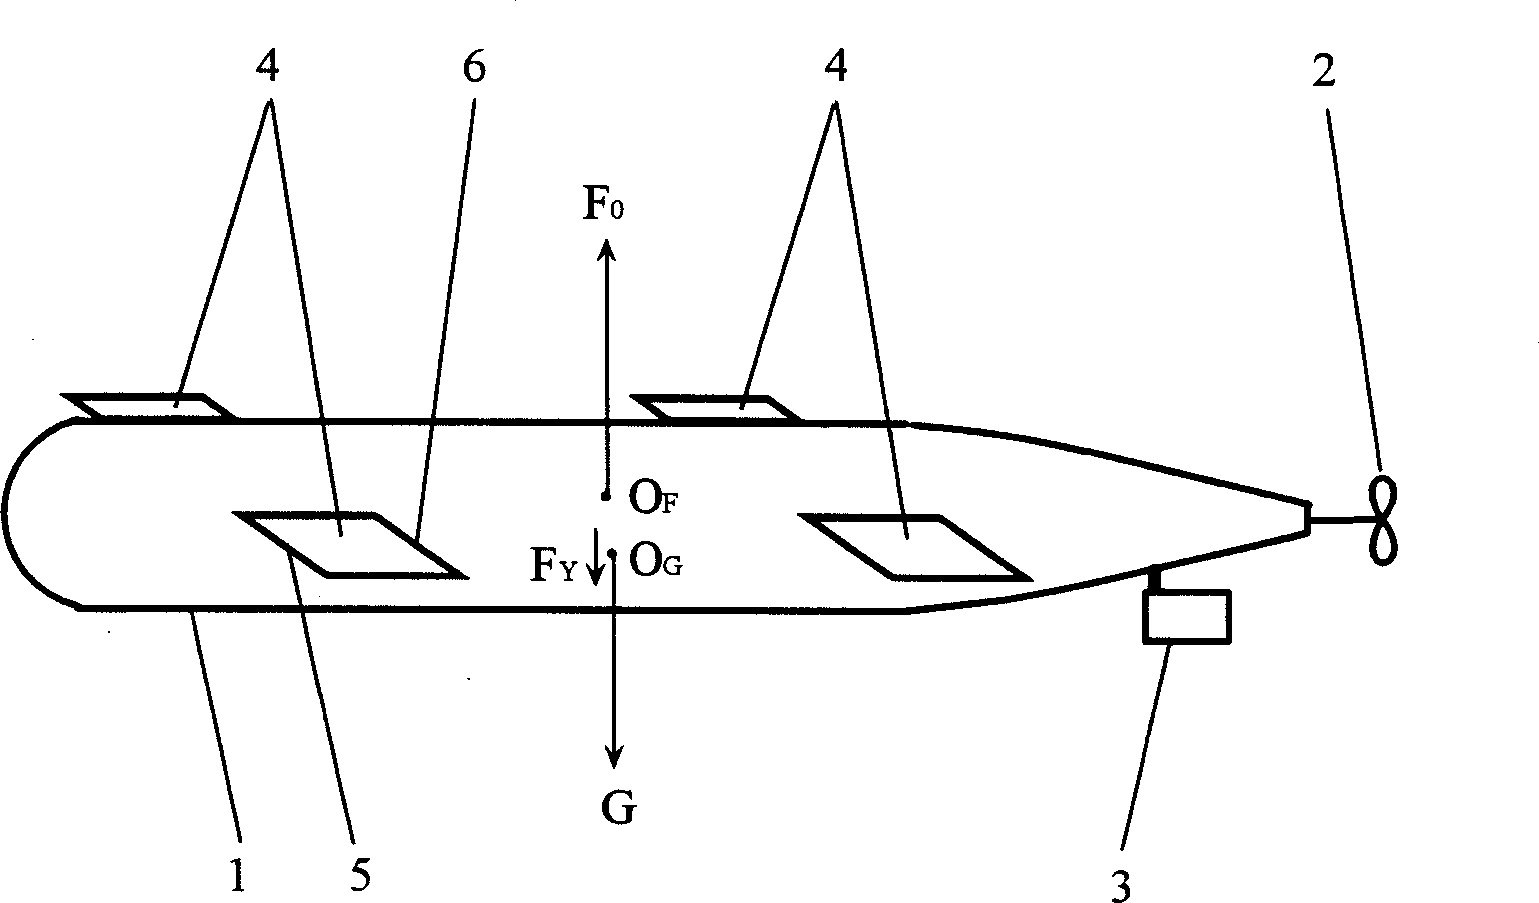 Neutral-floatage U-boat with canard arrangement, its navigation depth and suspending stop control thereof